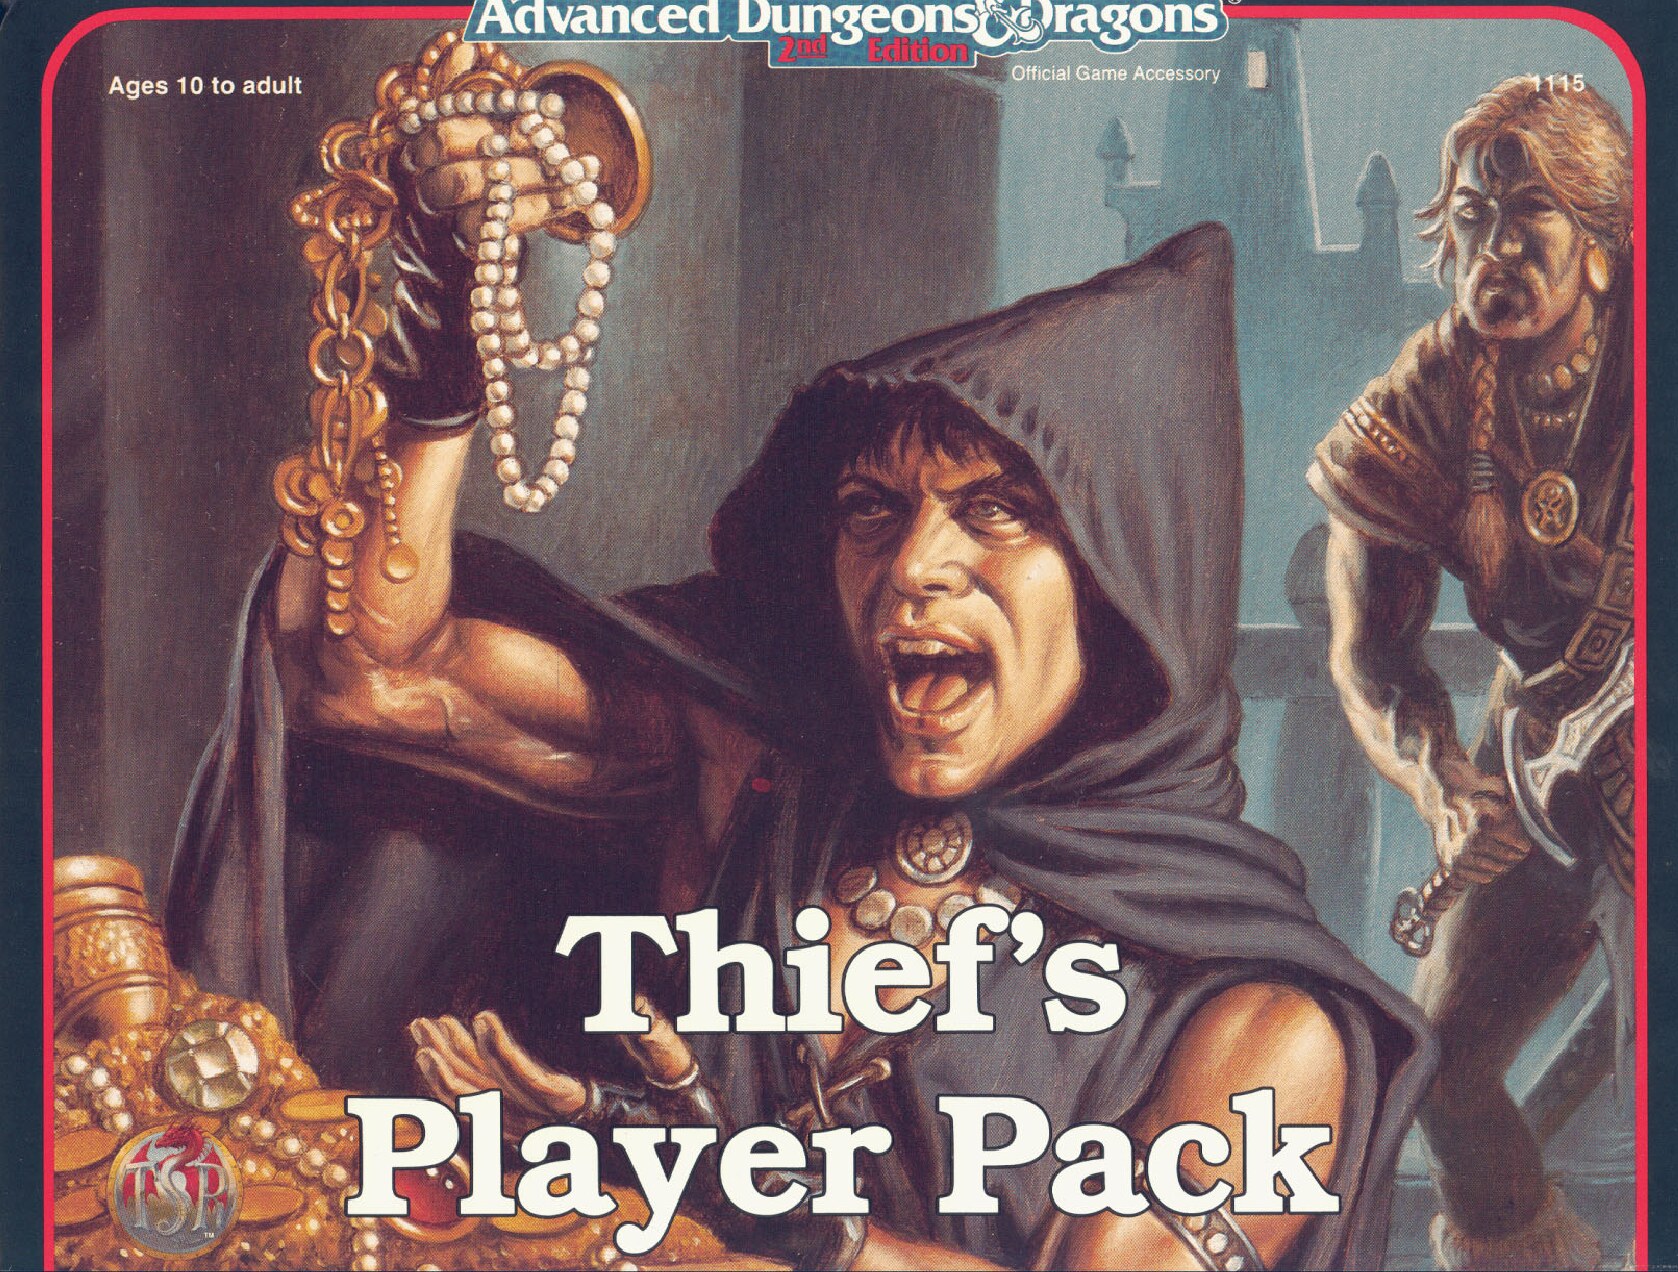 Thief's Players Pack (1115)